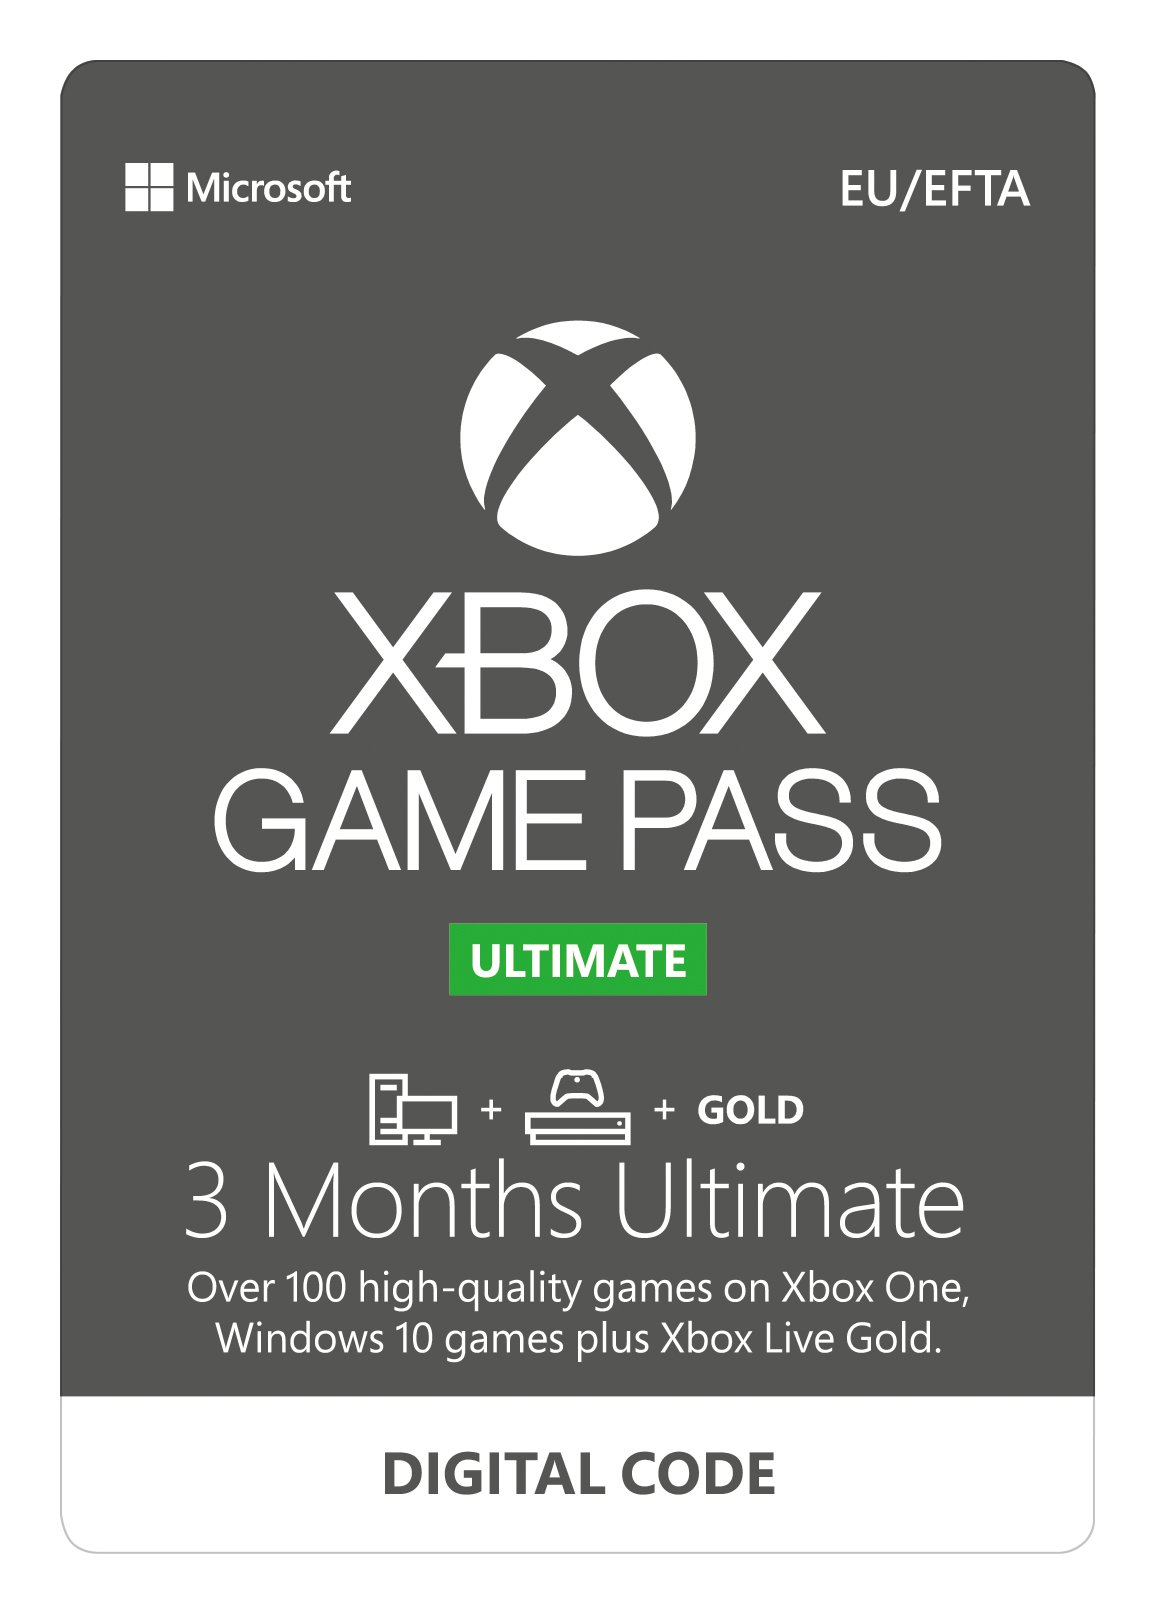 cannot download game pass pc games through xbox beta app